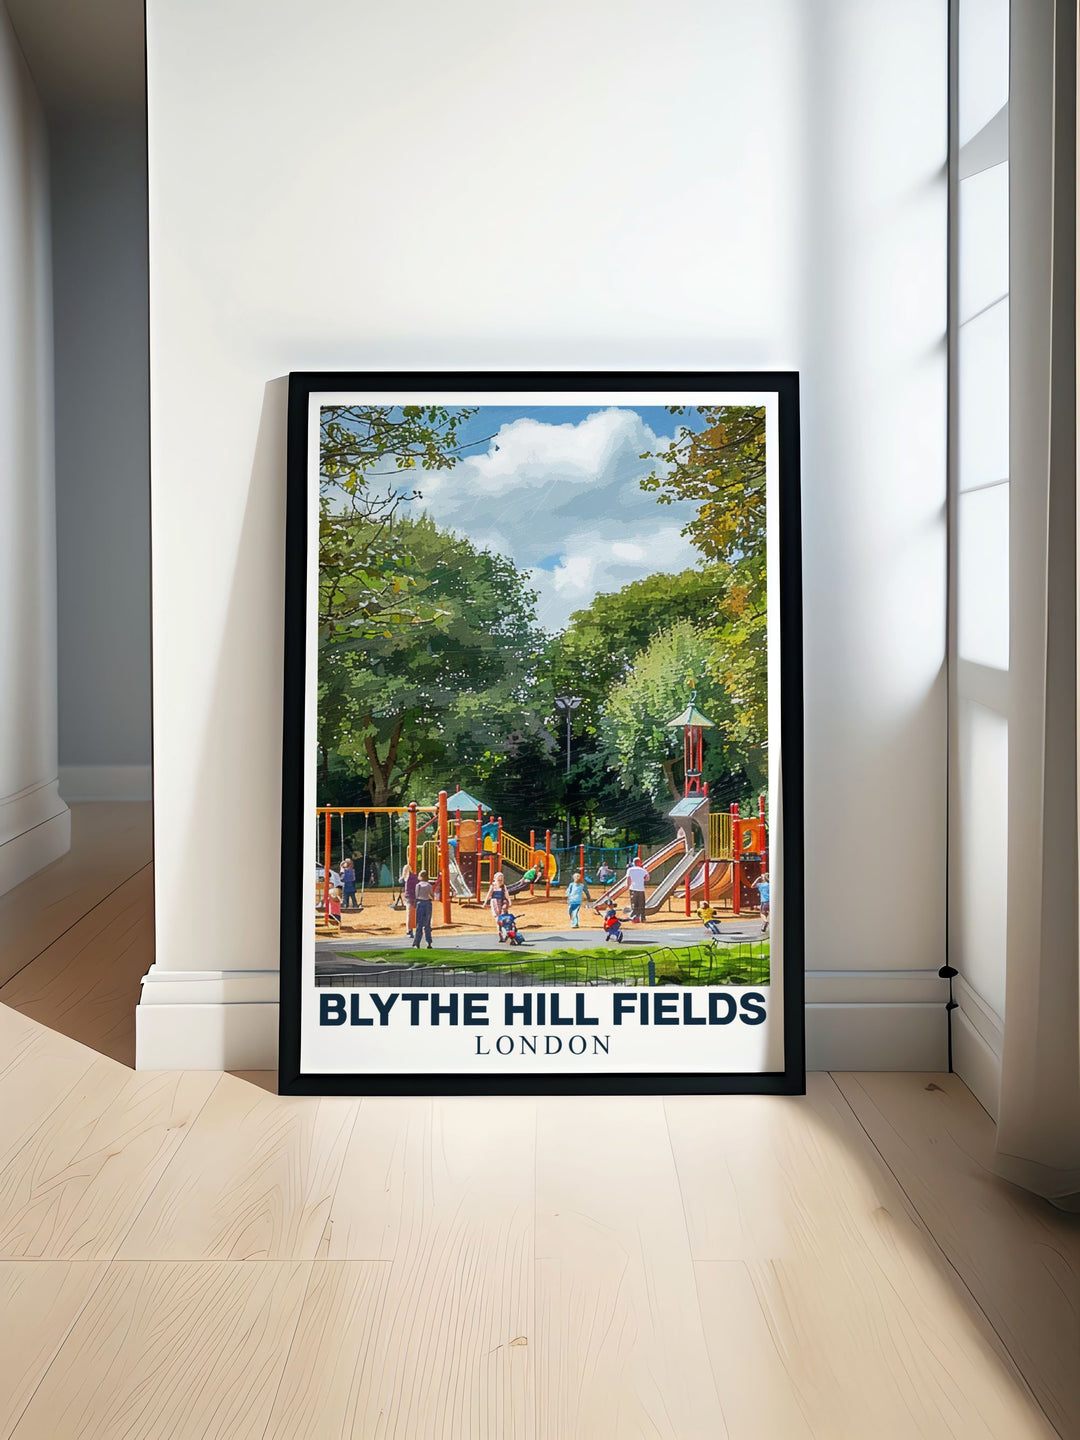 Showcasing the vibrant greenery and panoramic views of Blythe Hill Fields, this art print highlights one of Londons most treasured parks, perfect for adventure seekers and nature lovers.